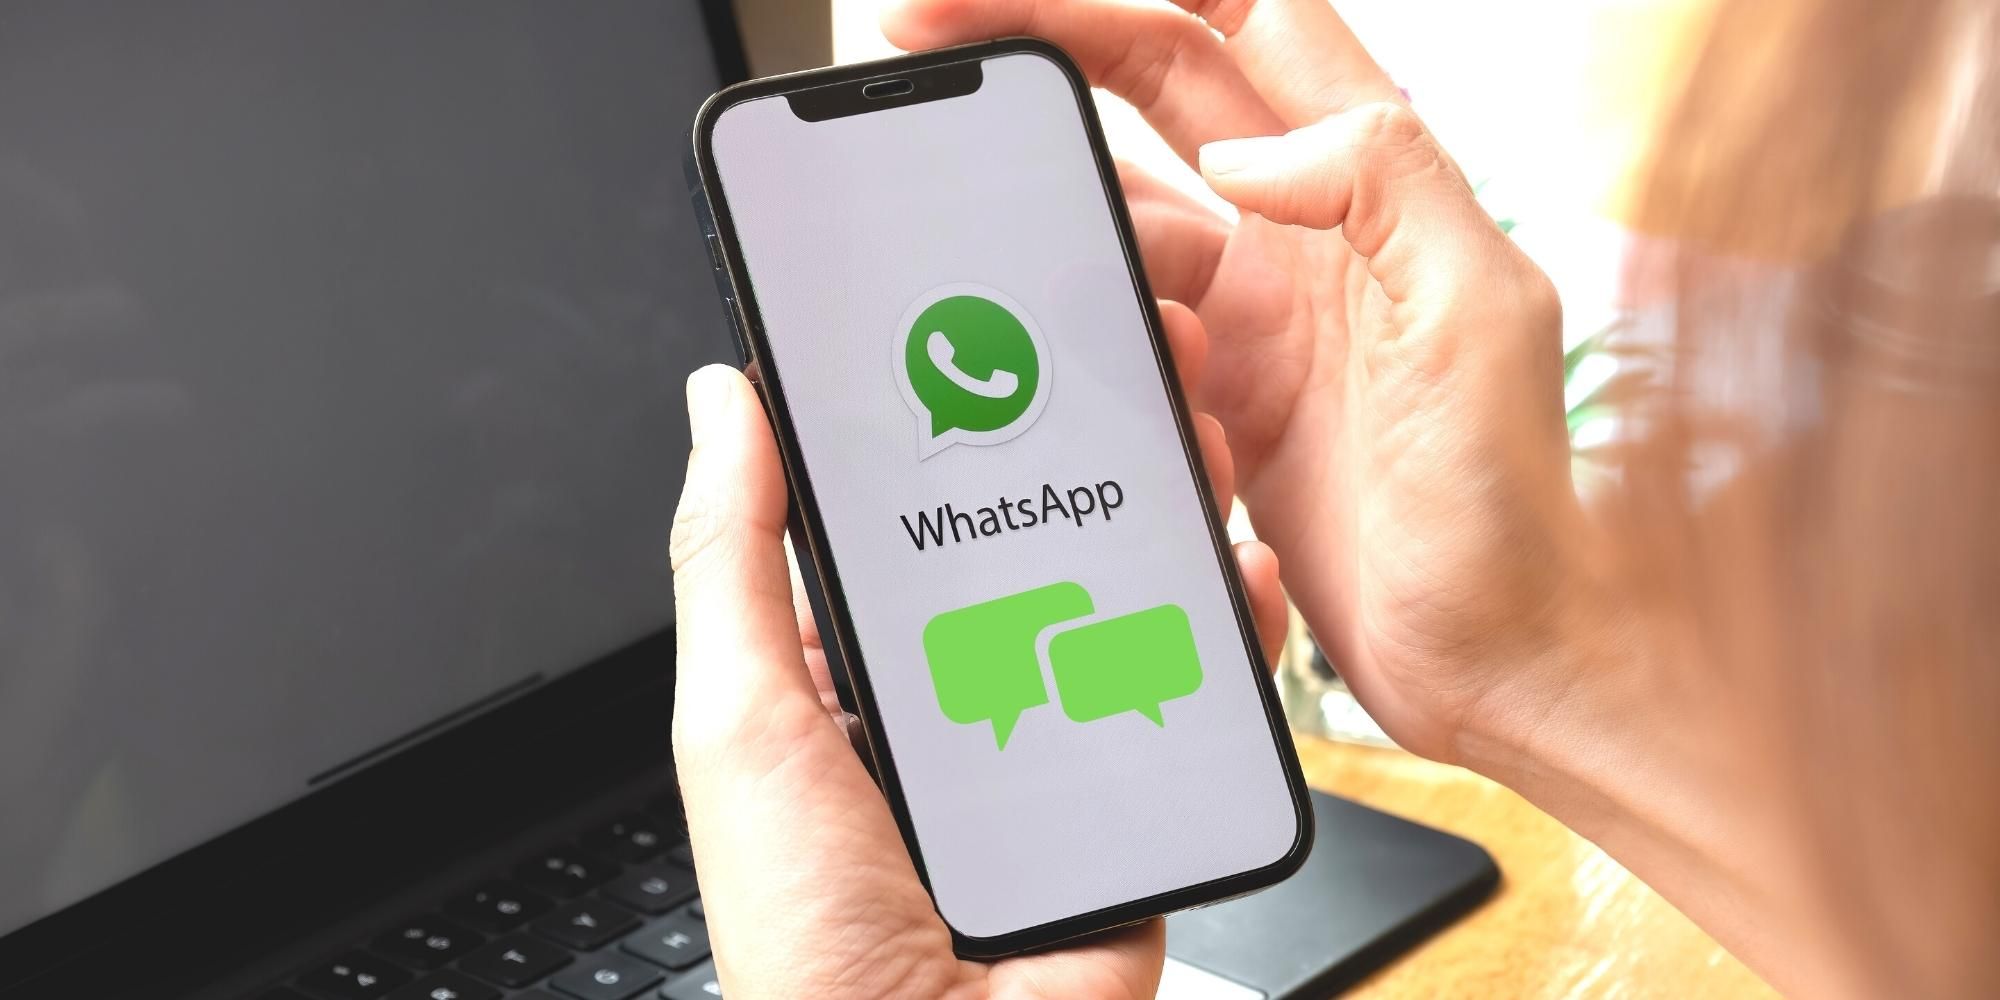 How to save messages on WhatsApp